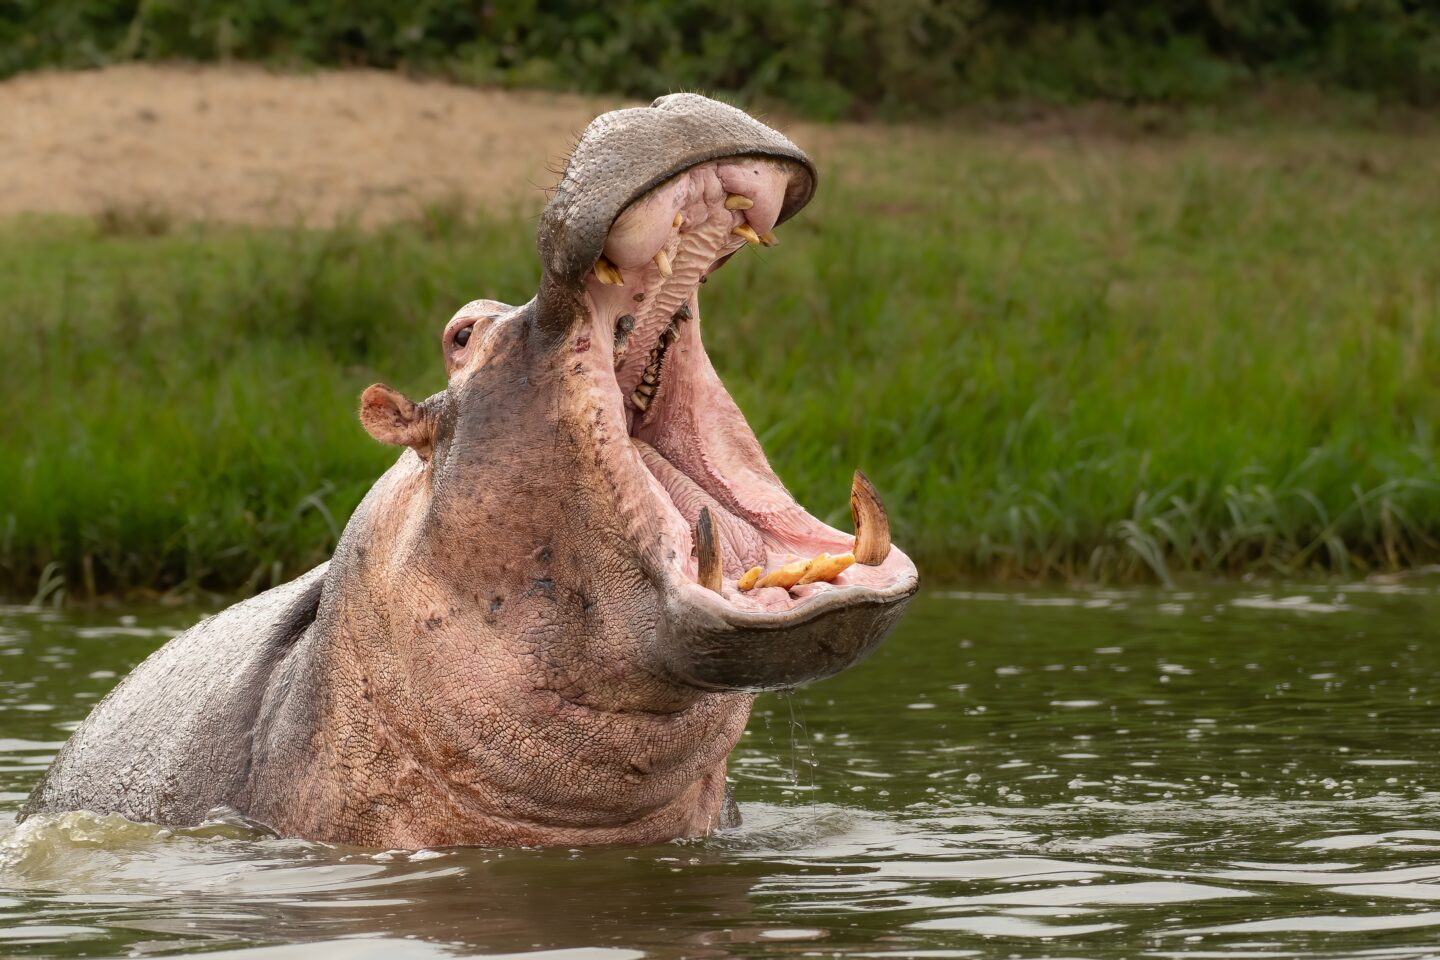 Pablo Escobar’s Hippos Have Been Running Amok So Colombia Is Going To Kill, Sterilize Some